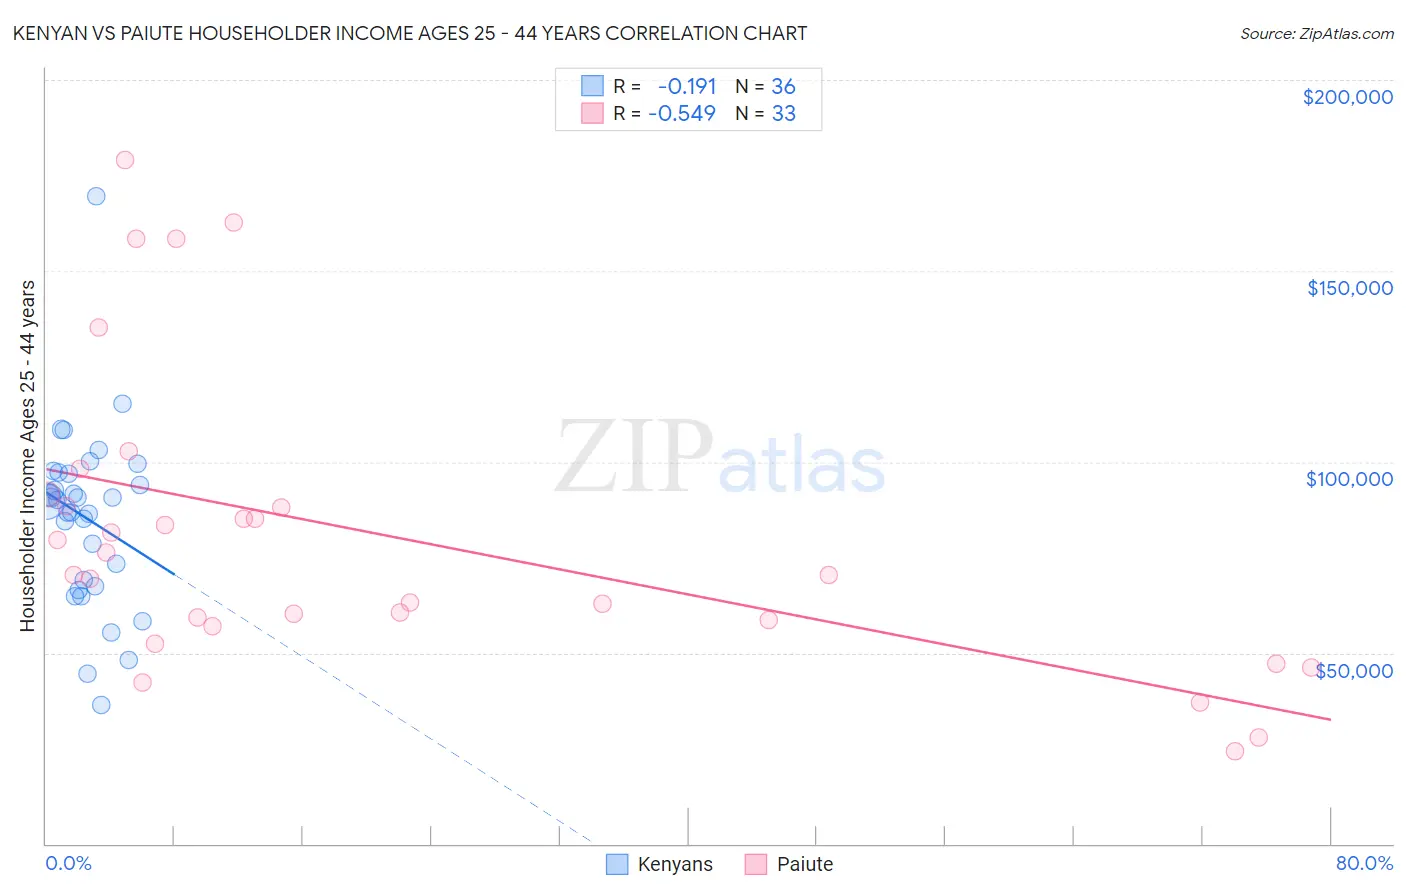 Kenyan vs Paiute Householder Income Ages 25 - 44 years